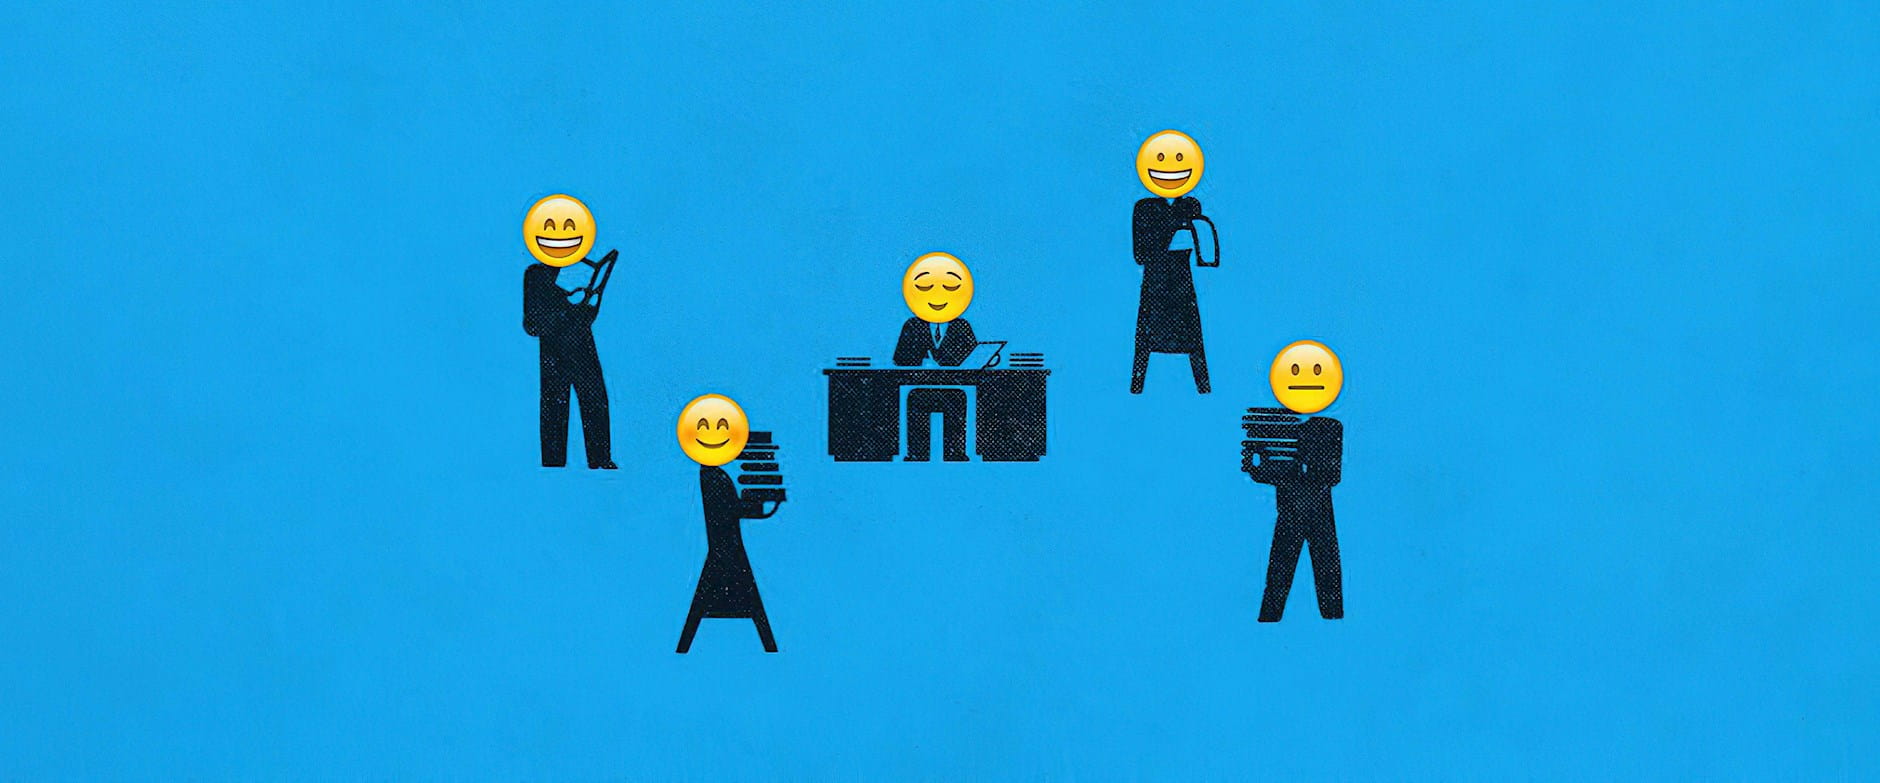 Illustration of office workers with emojis as faces